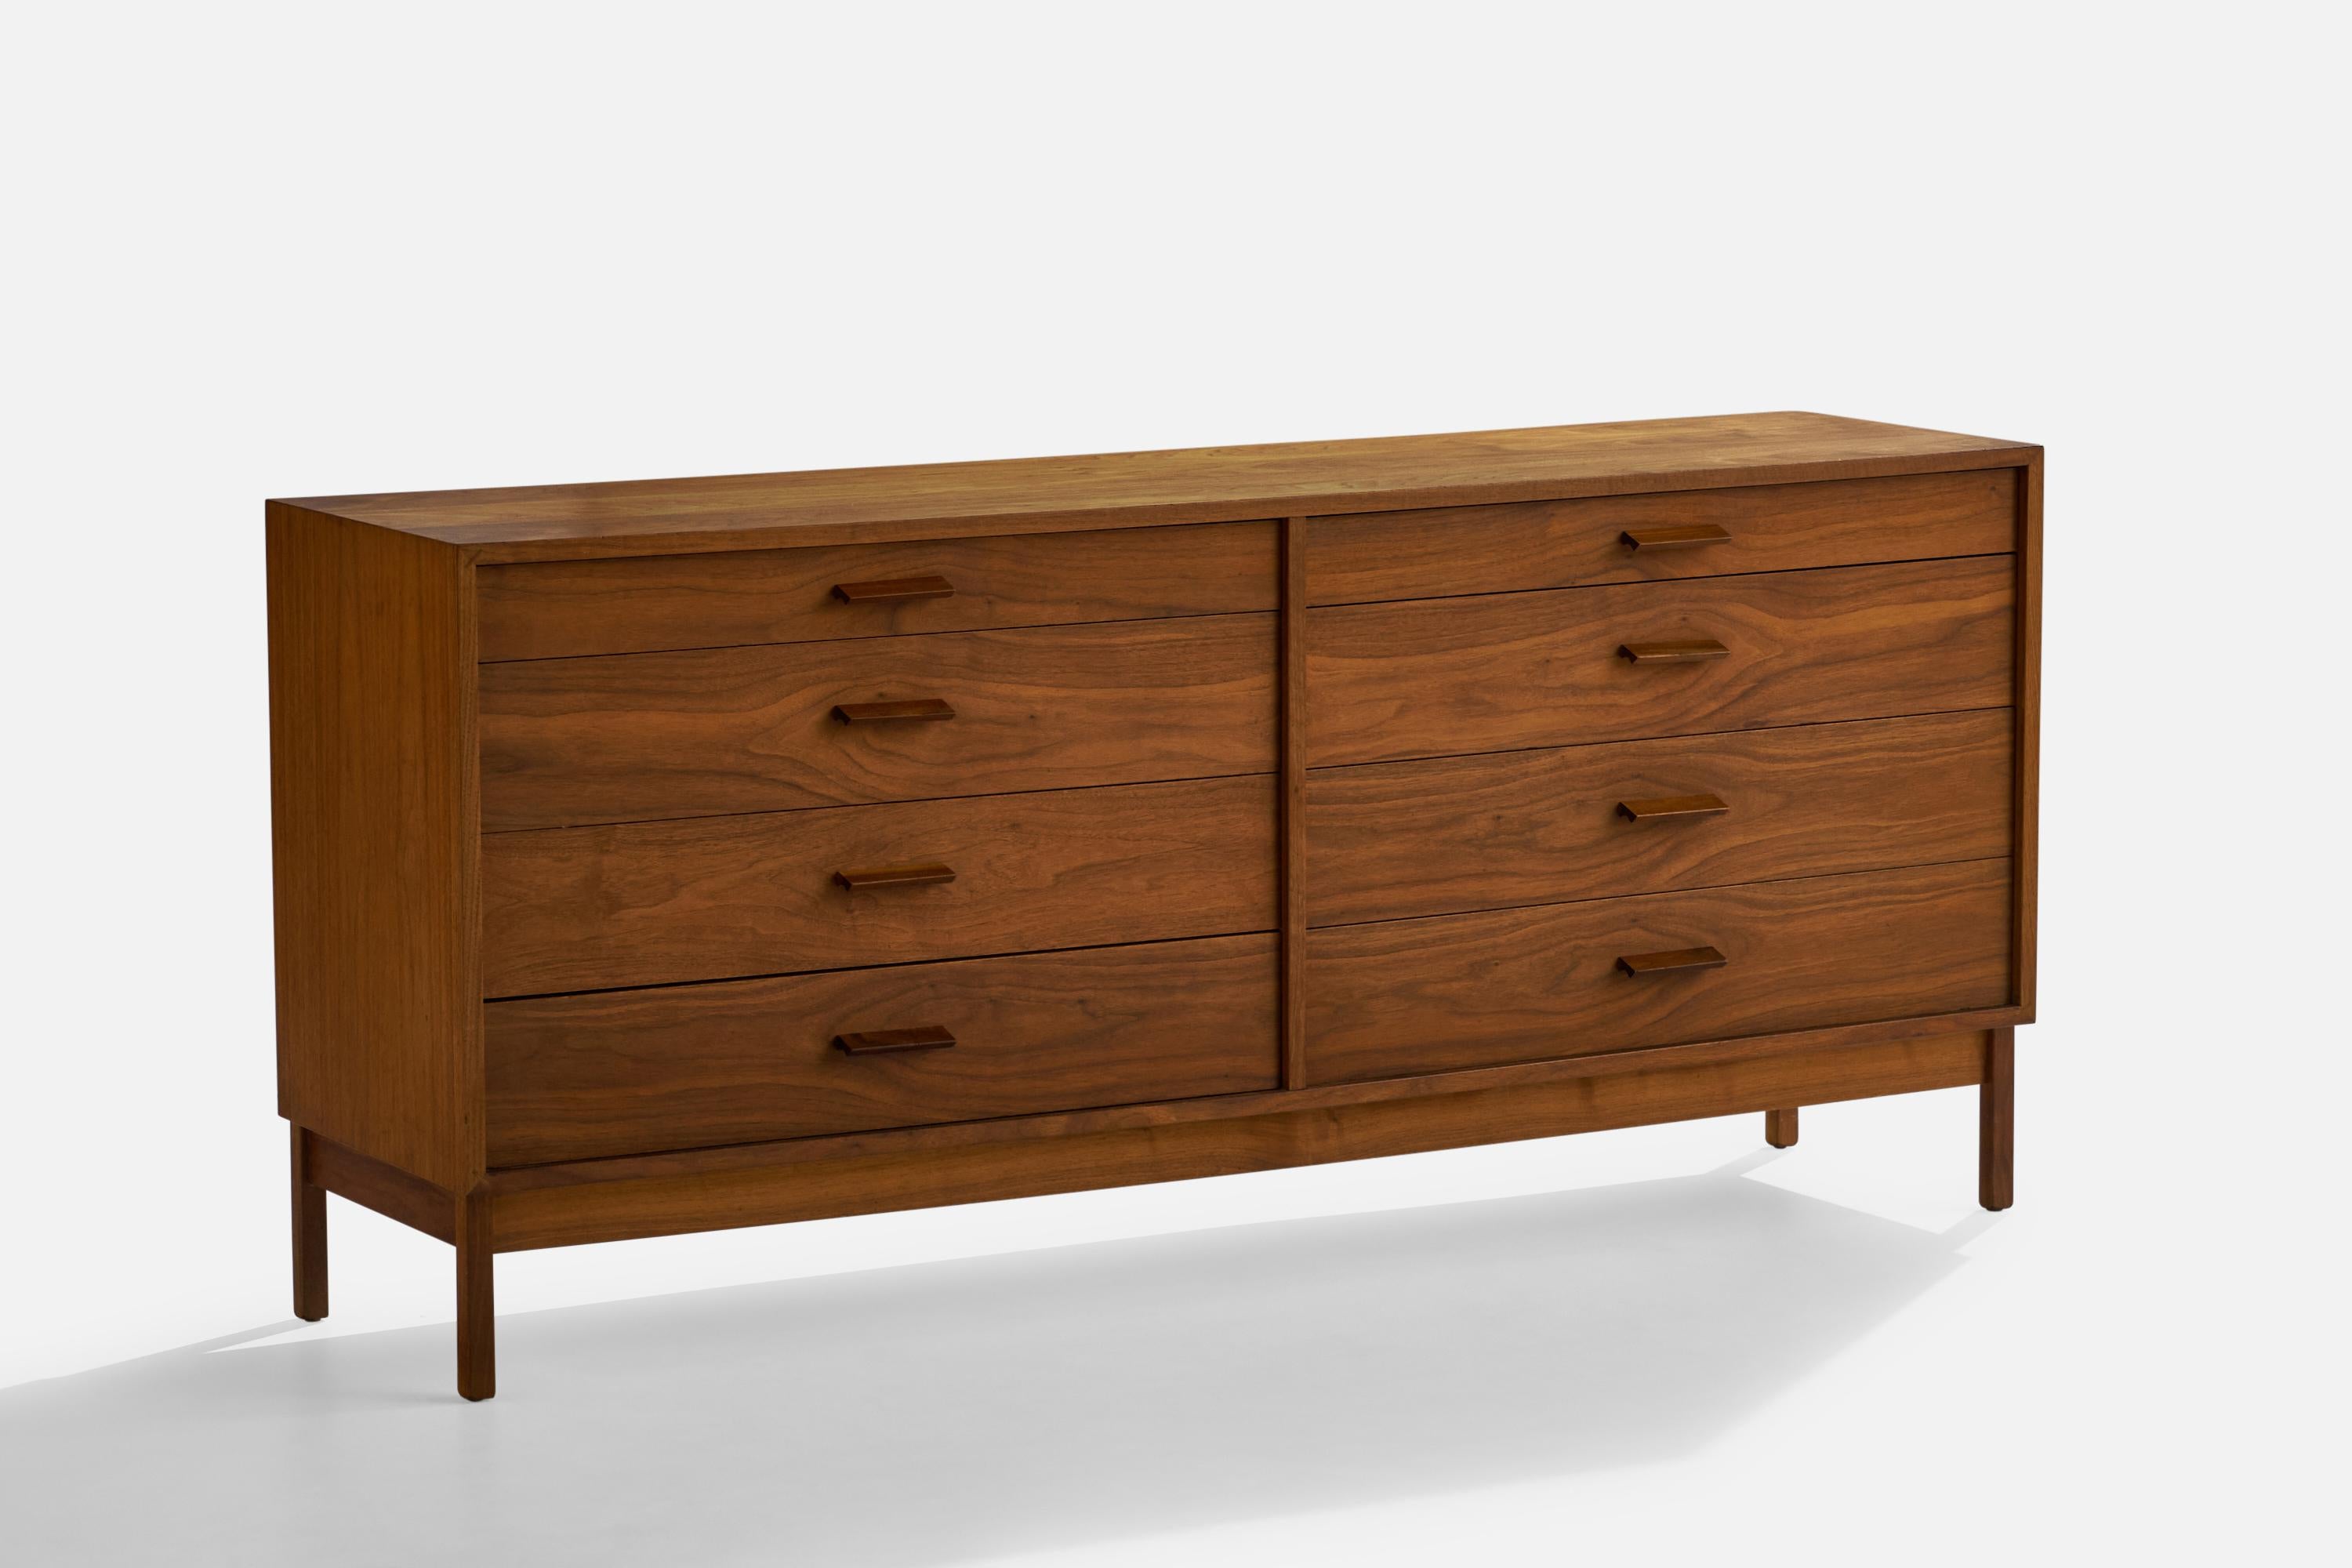 A walnut cabinet designed and produced by Richard Artschwager, USA, 1950s.